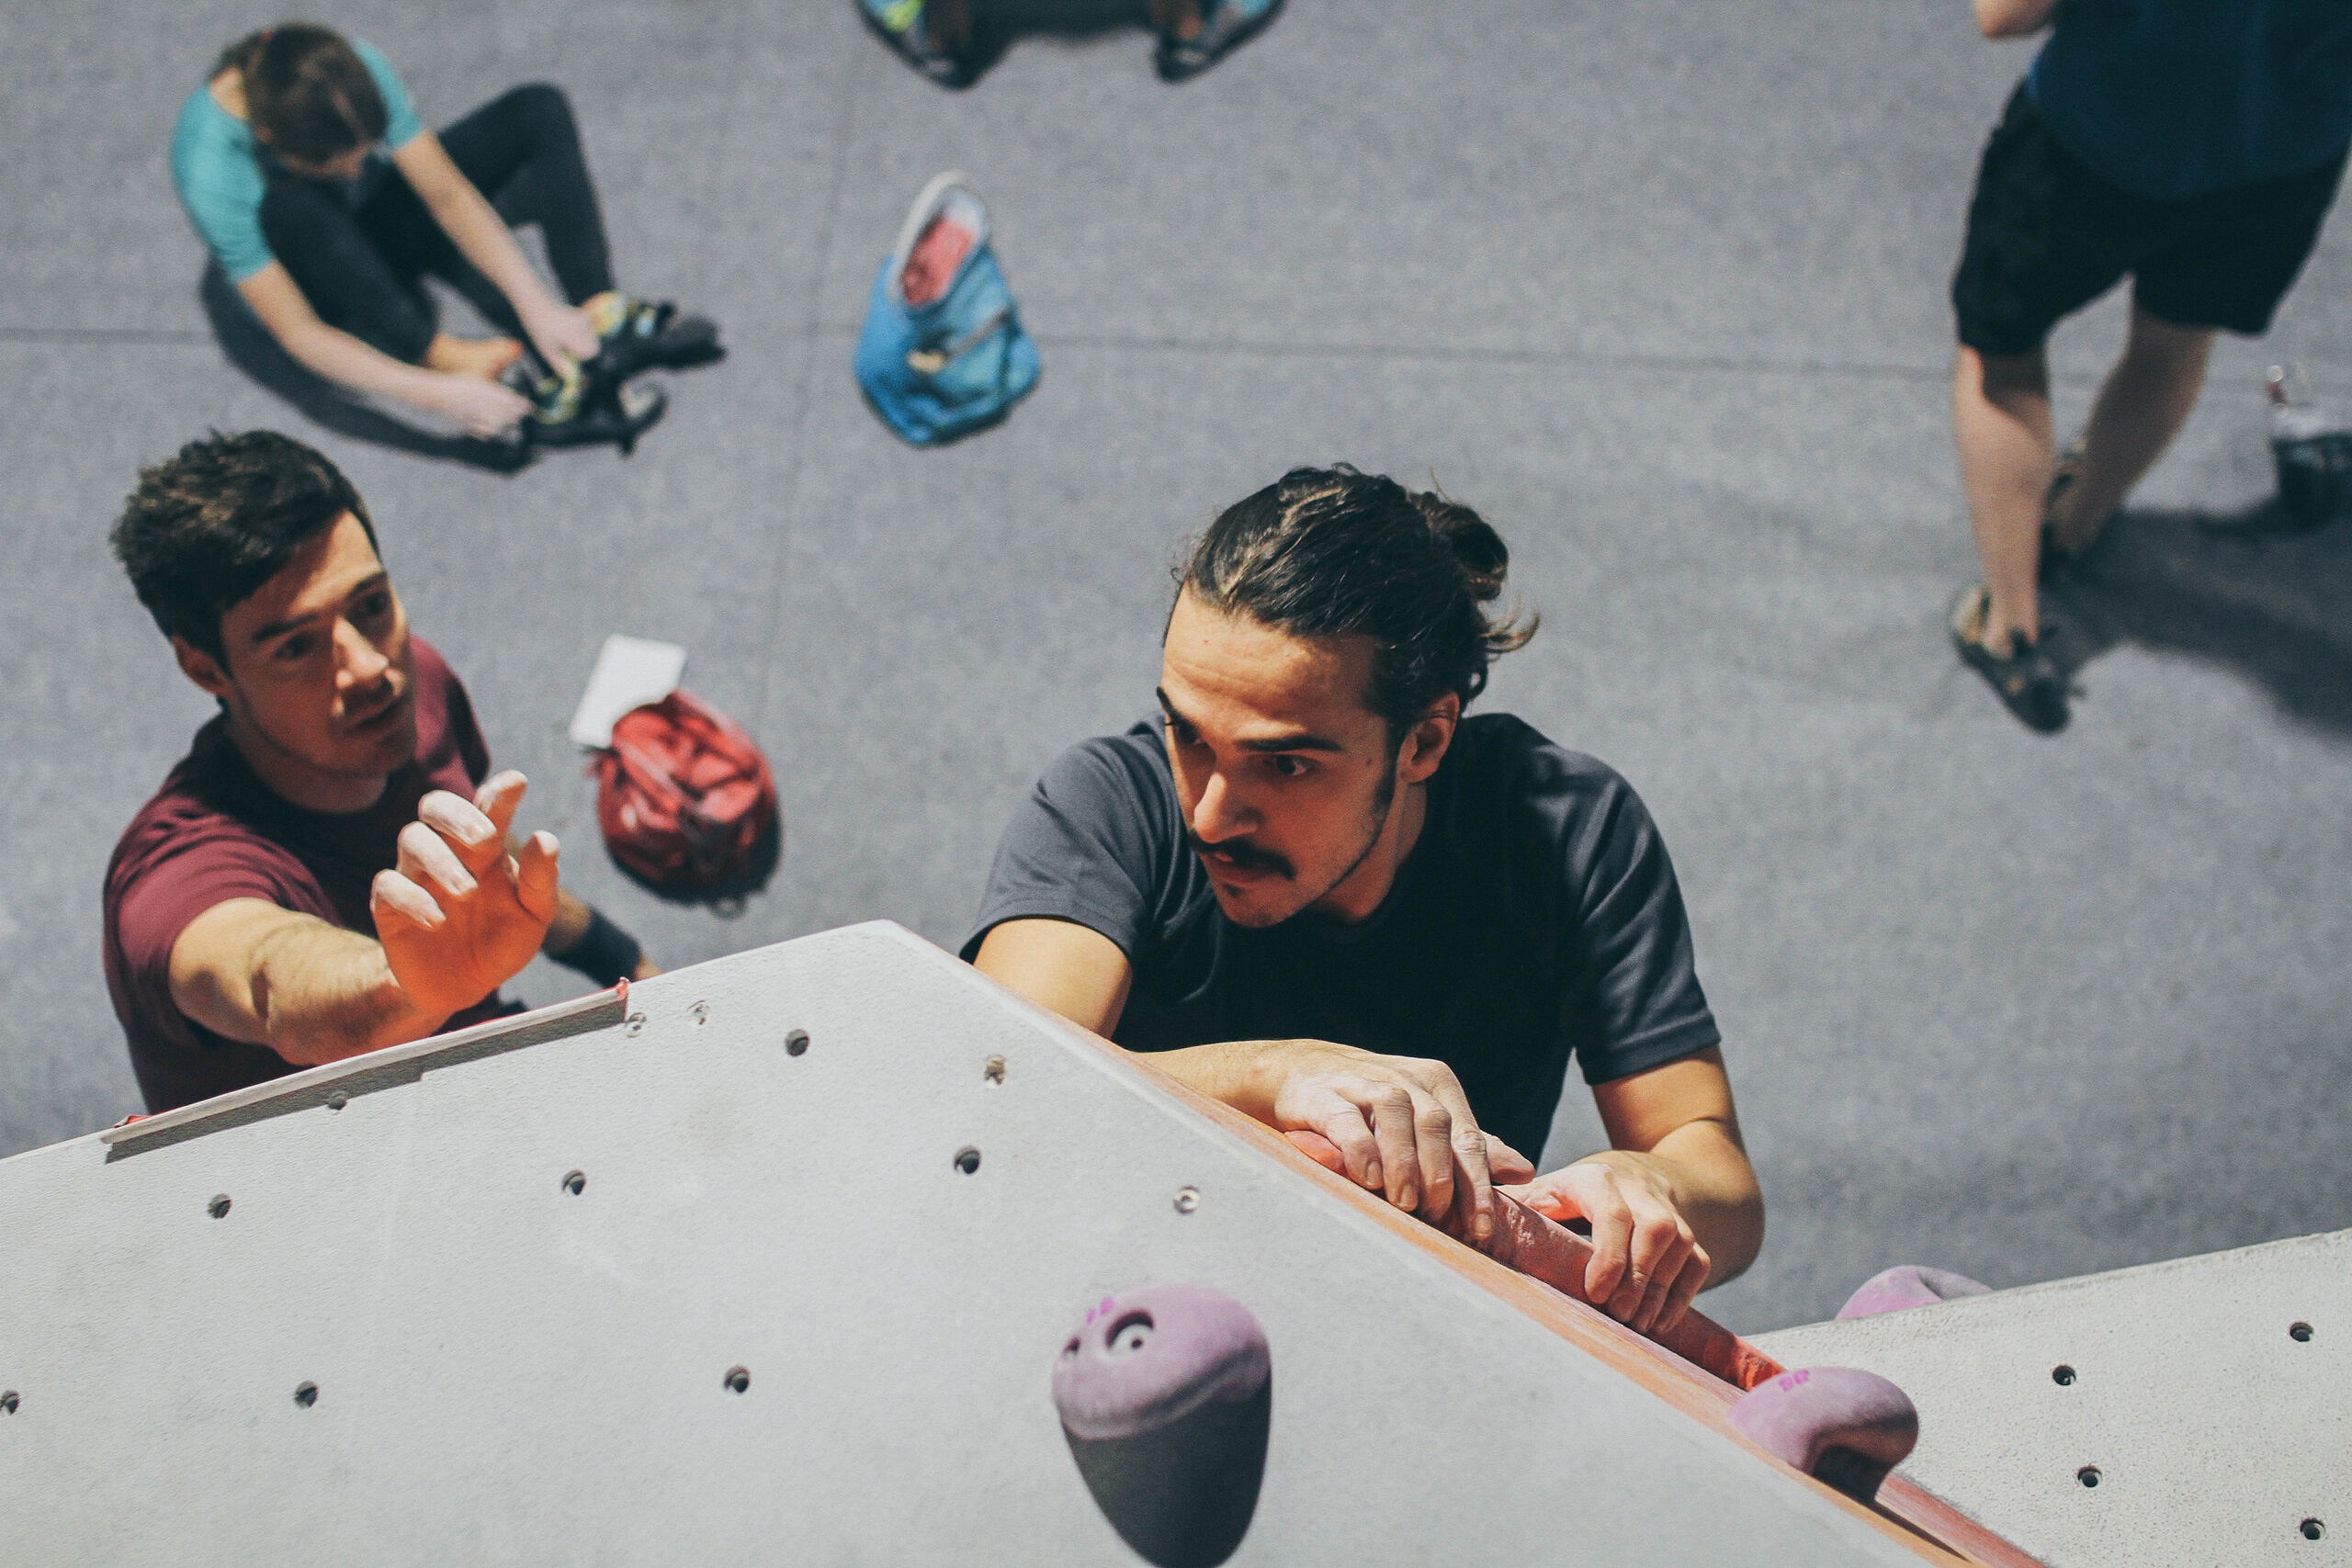 Climbing walls will need to take special precautions upon reopening.  © Sam Scriven/The Climbing Academy